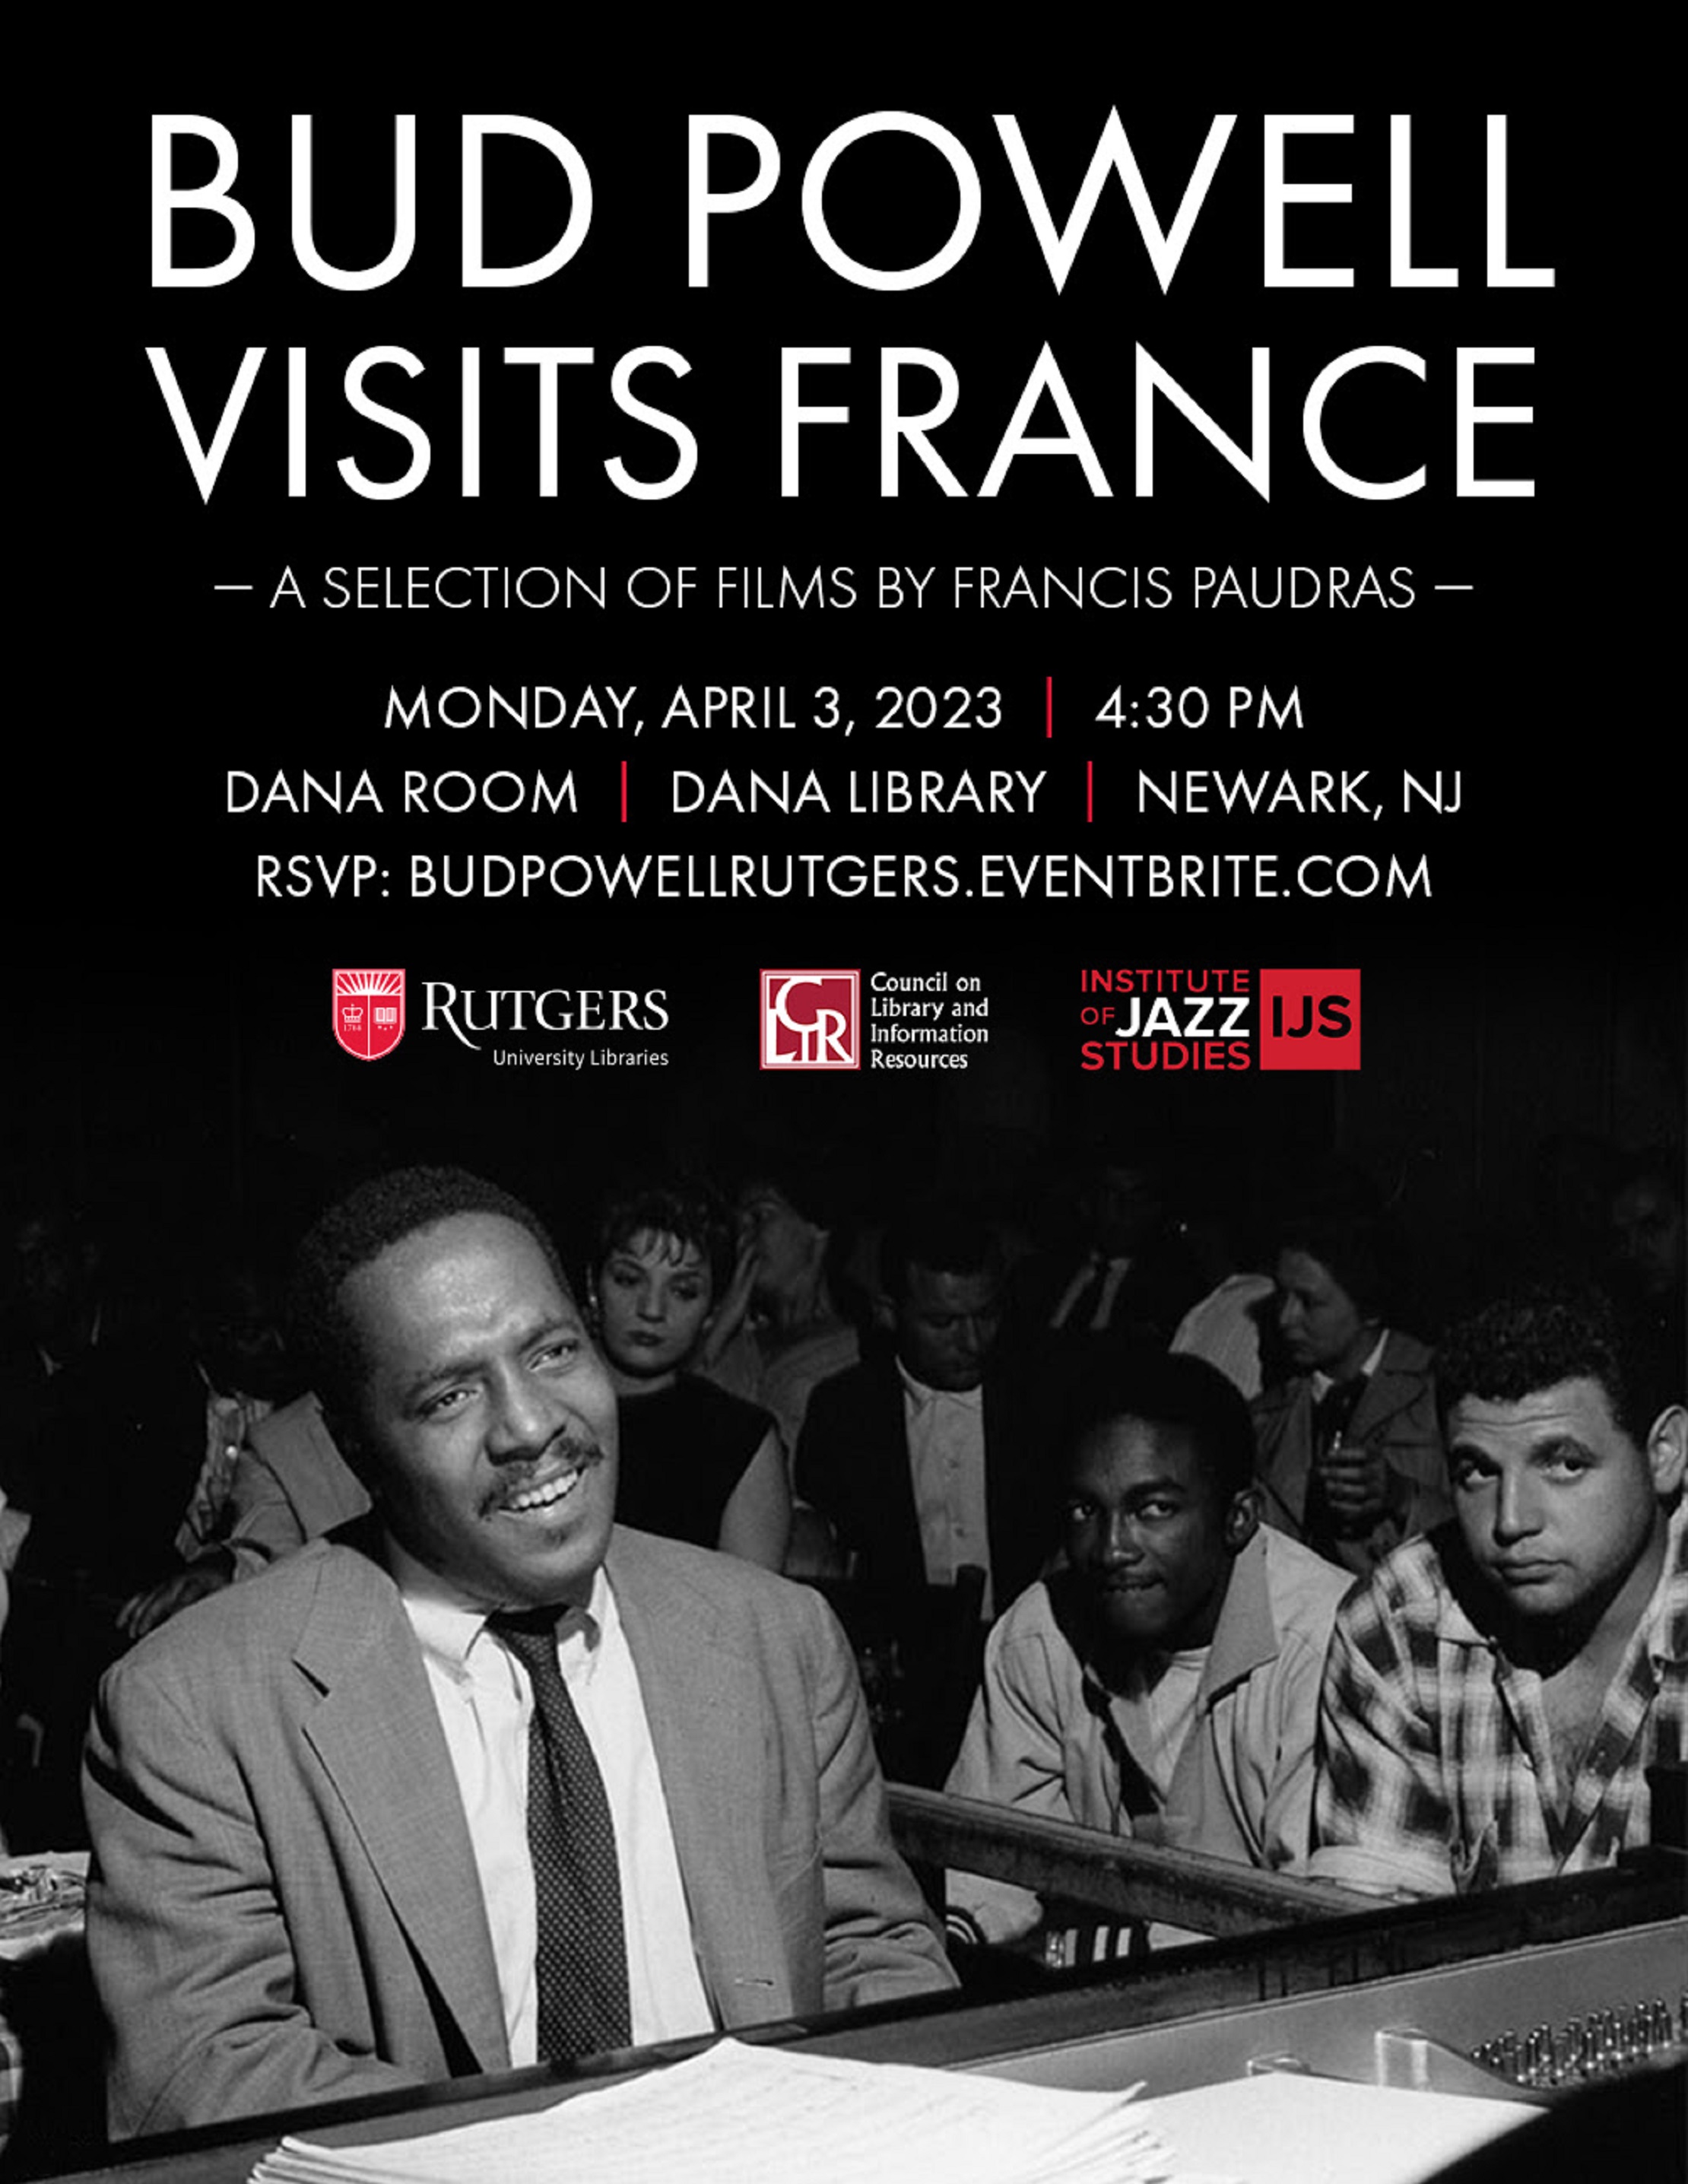 Bud Powell visits France Institute of Jazz Studies